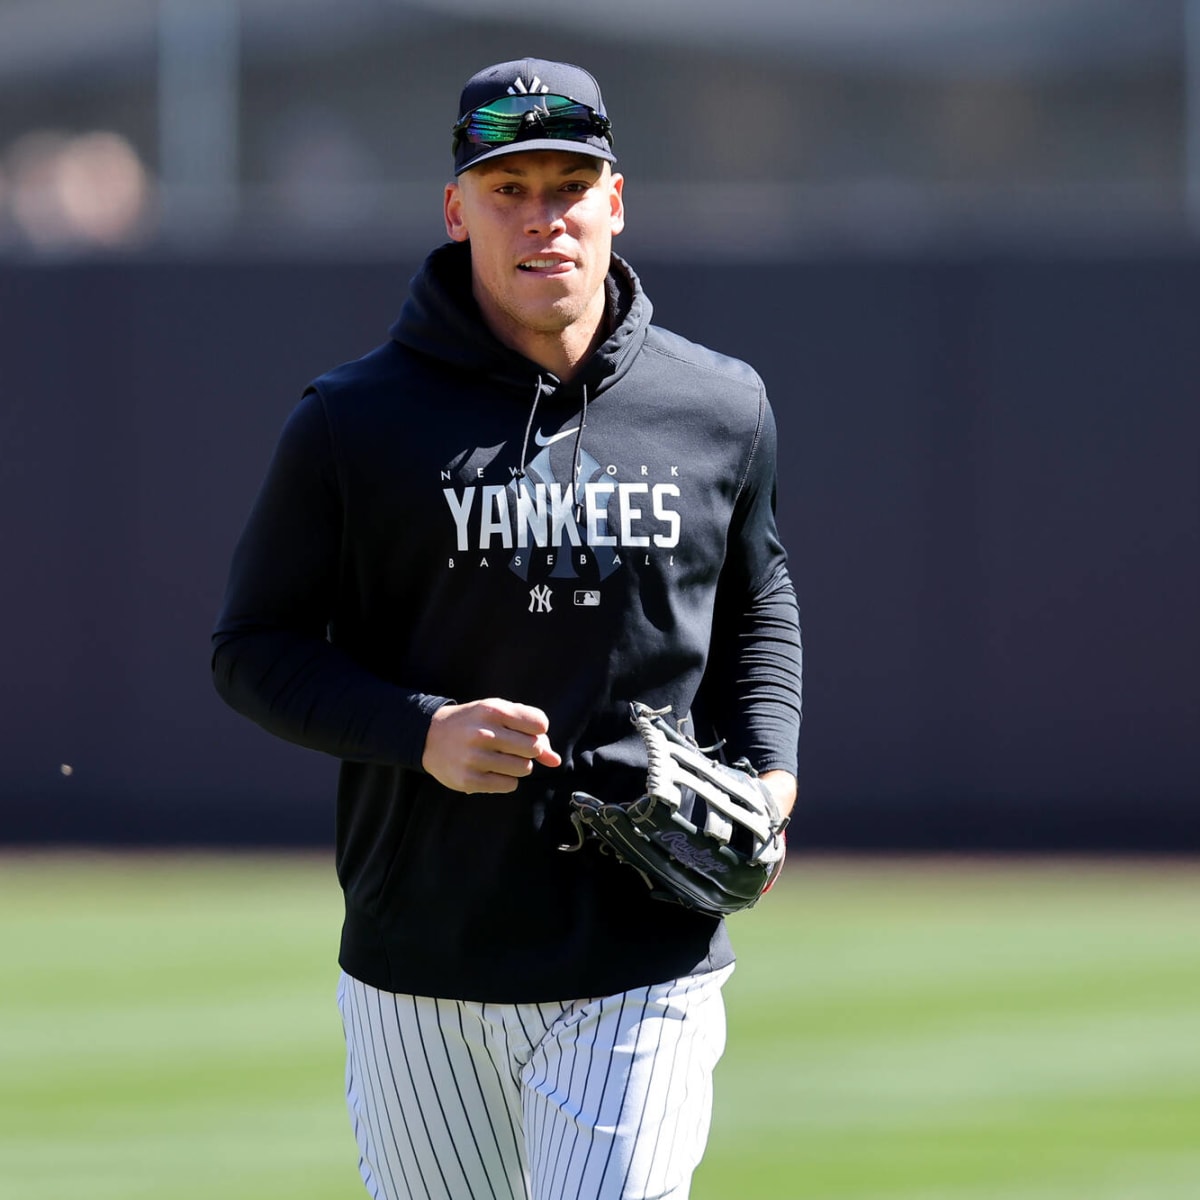 Where Do the Giants Go After Losing Out on Aaron Judge? - Stadium